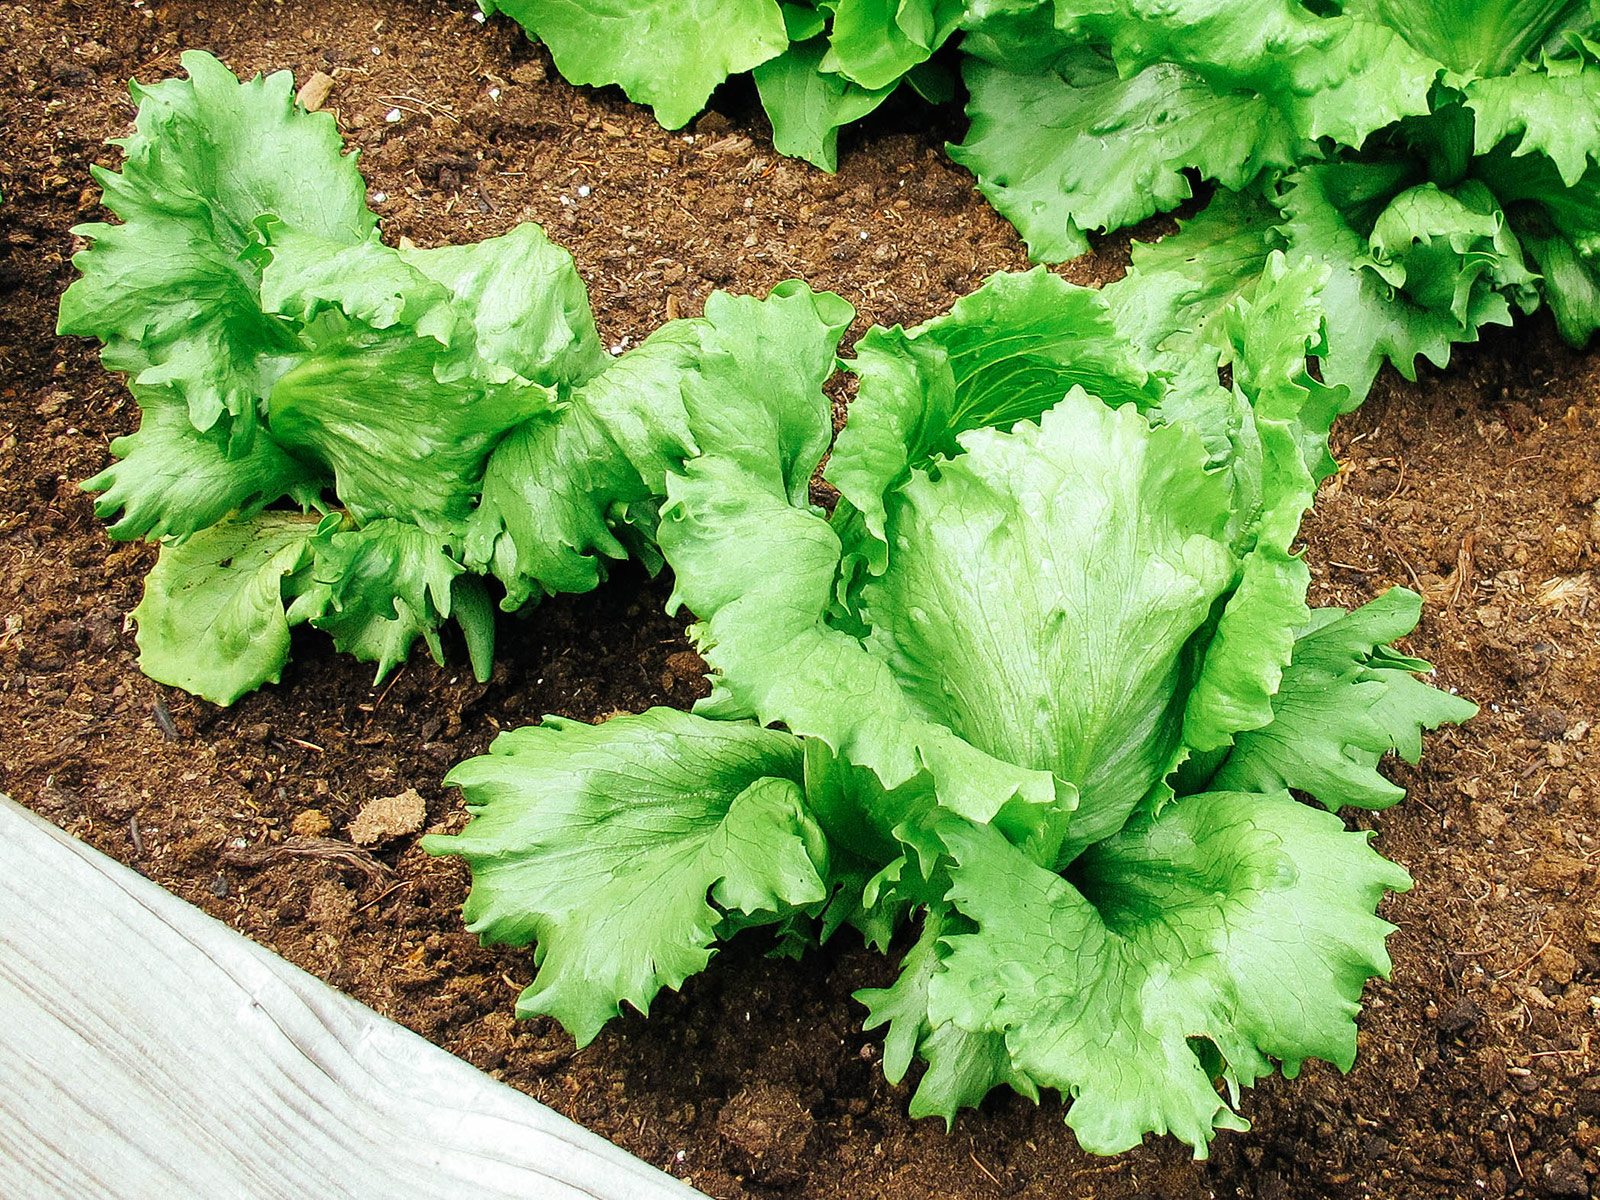 Heat-tolerant iceberg lettuce with frilled edges growing in a raised bed